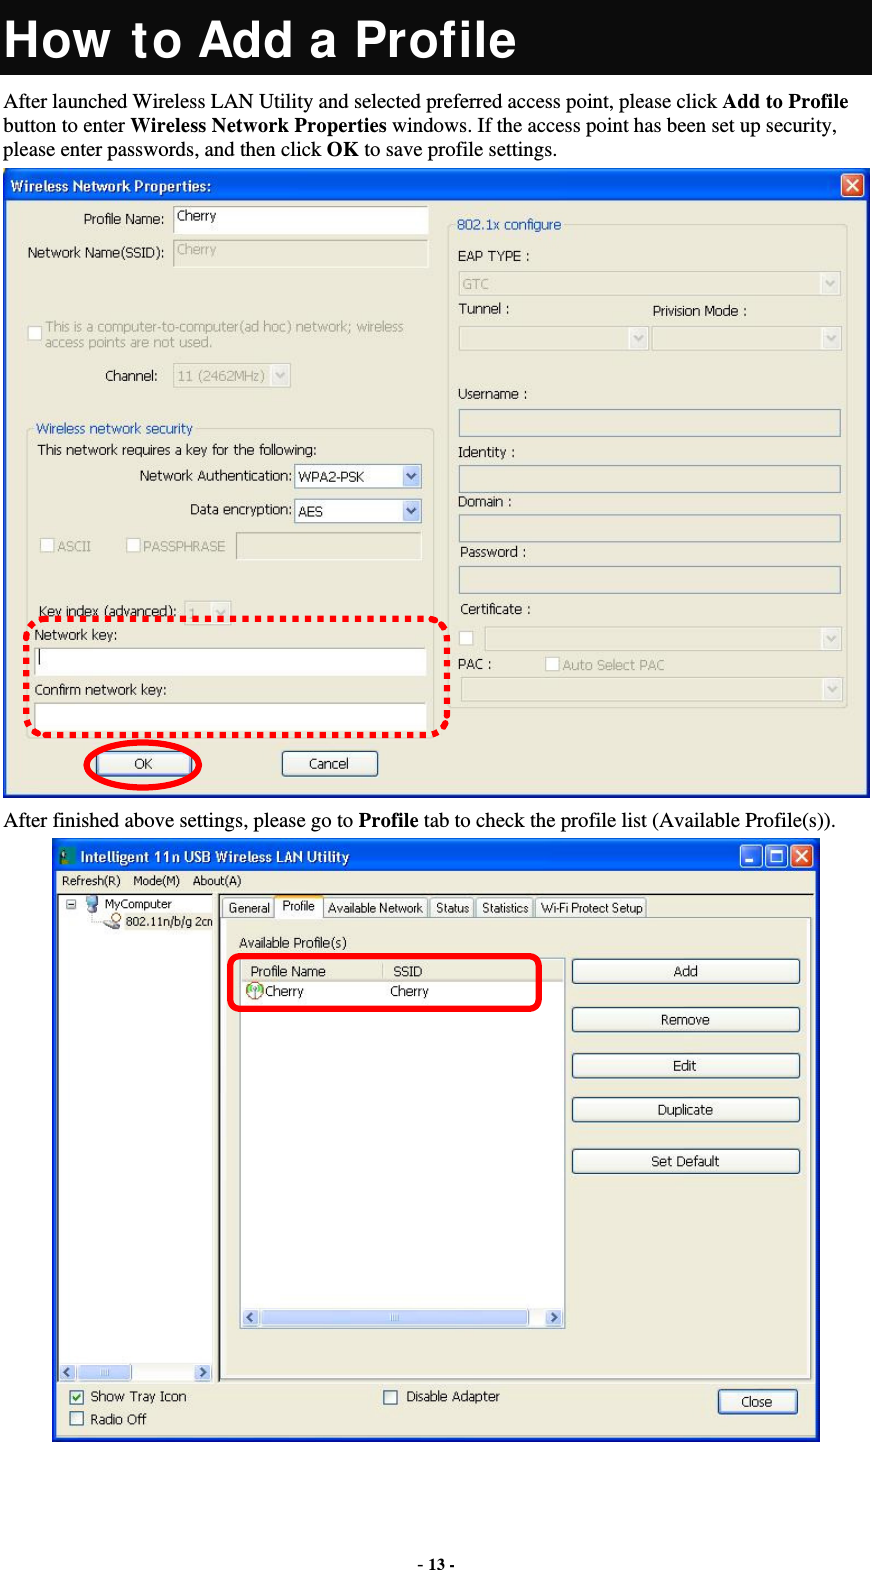  - 13 - How to Add a Profile After launched Wireless LAN Utility and selected preferred access point, please click Add to Profile button to enter Wireless Network Properties windows. If the access point has been set up security, please enter passwords, and then click OK to save profile settings.  After finished above settings, please go to Profile tab to check the profile list (Available Profile(s)).  